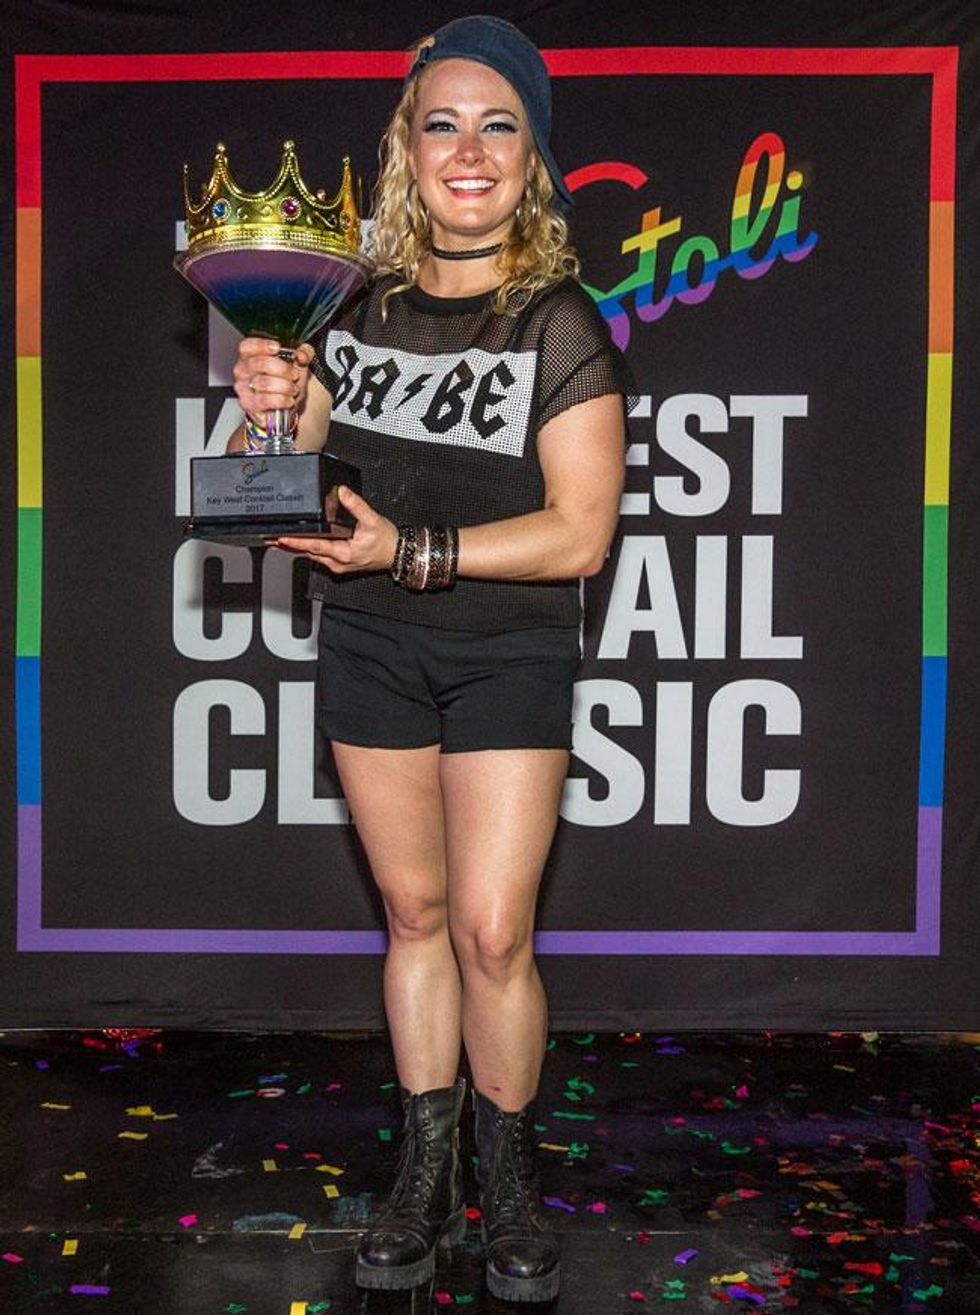 The 2017 Stoli Key West Cocktail Classic Champion Kayla Hasbrook, representing NYC and her home bar ABC Cocina, raises up her trophy.